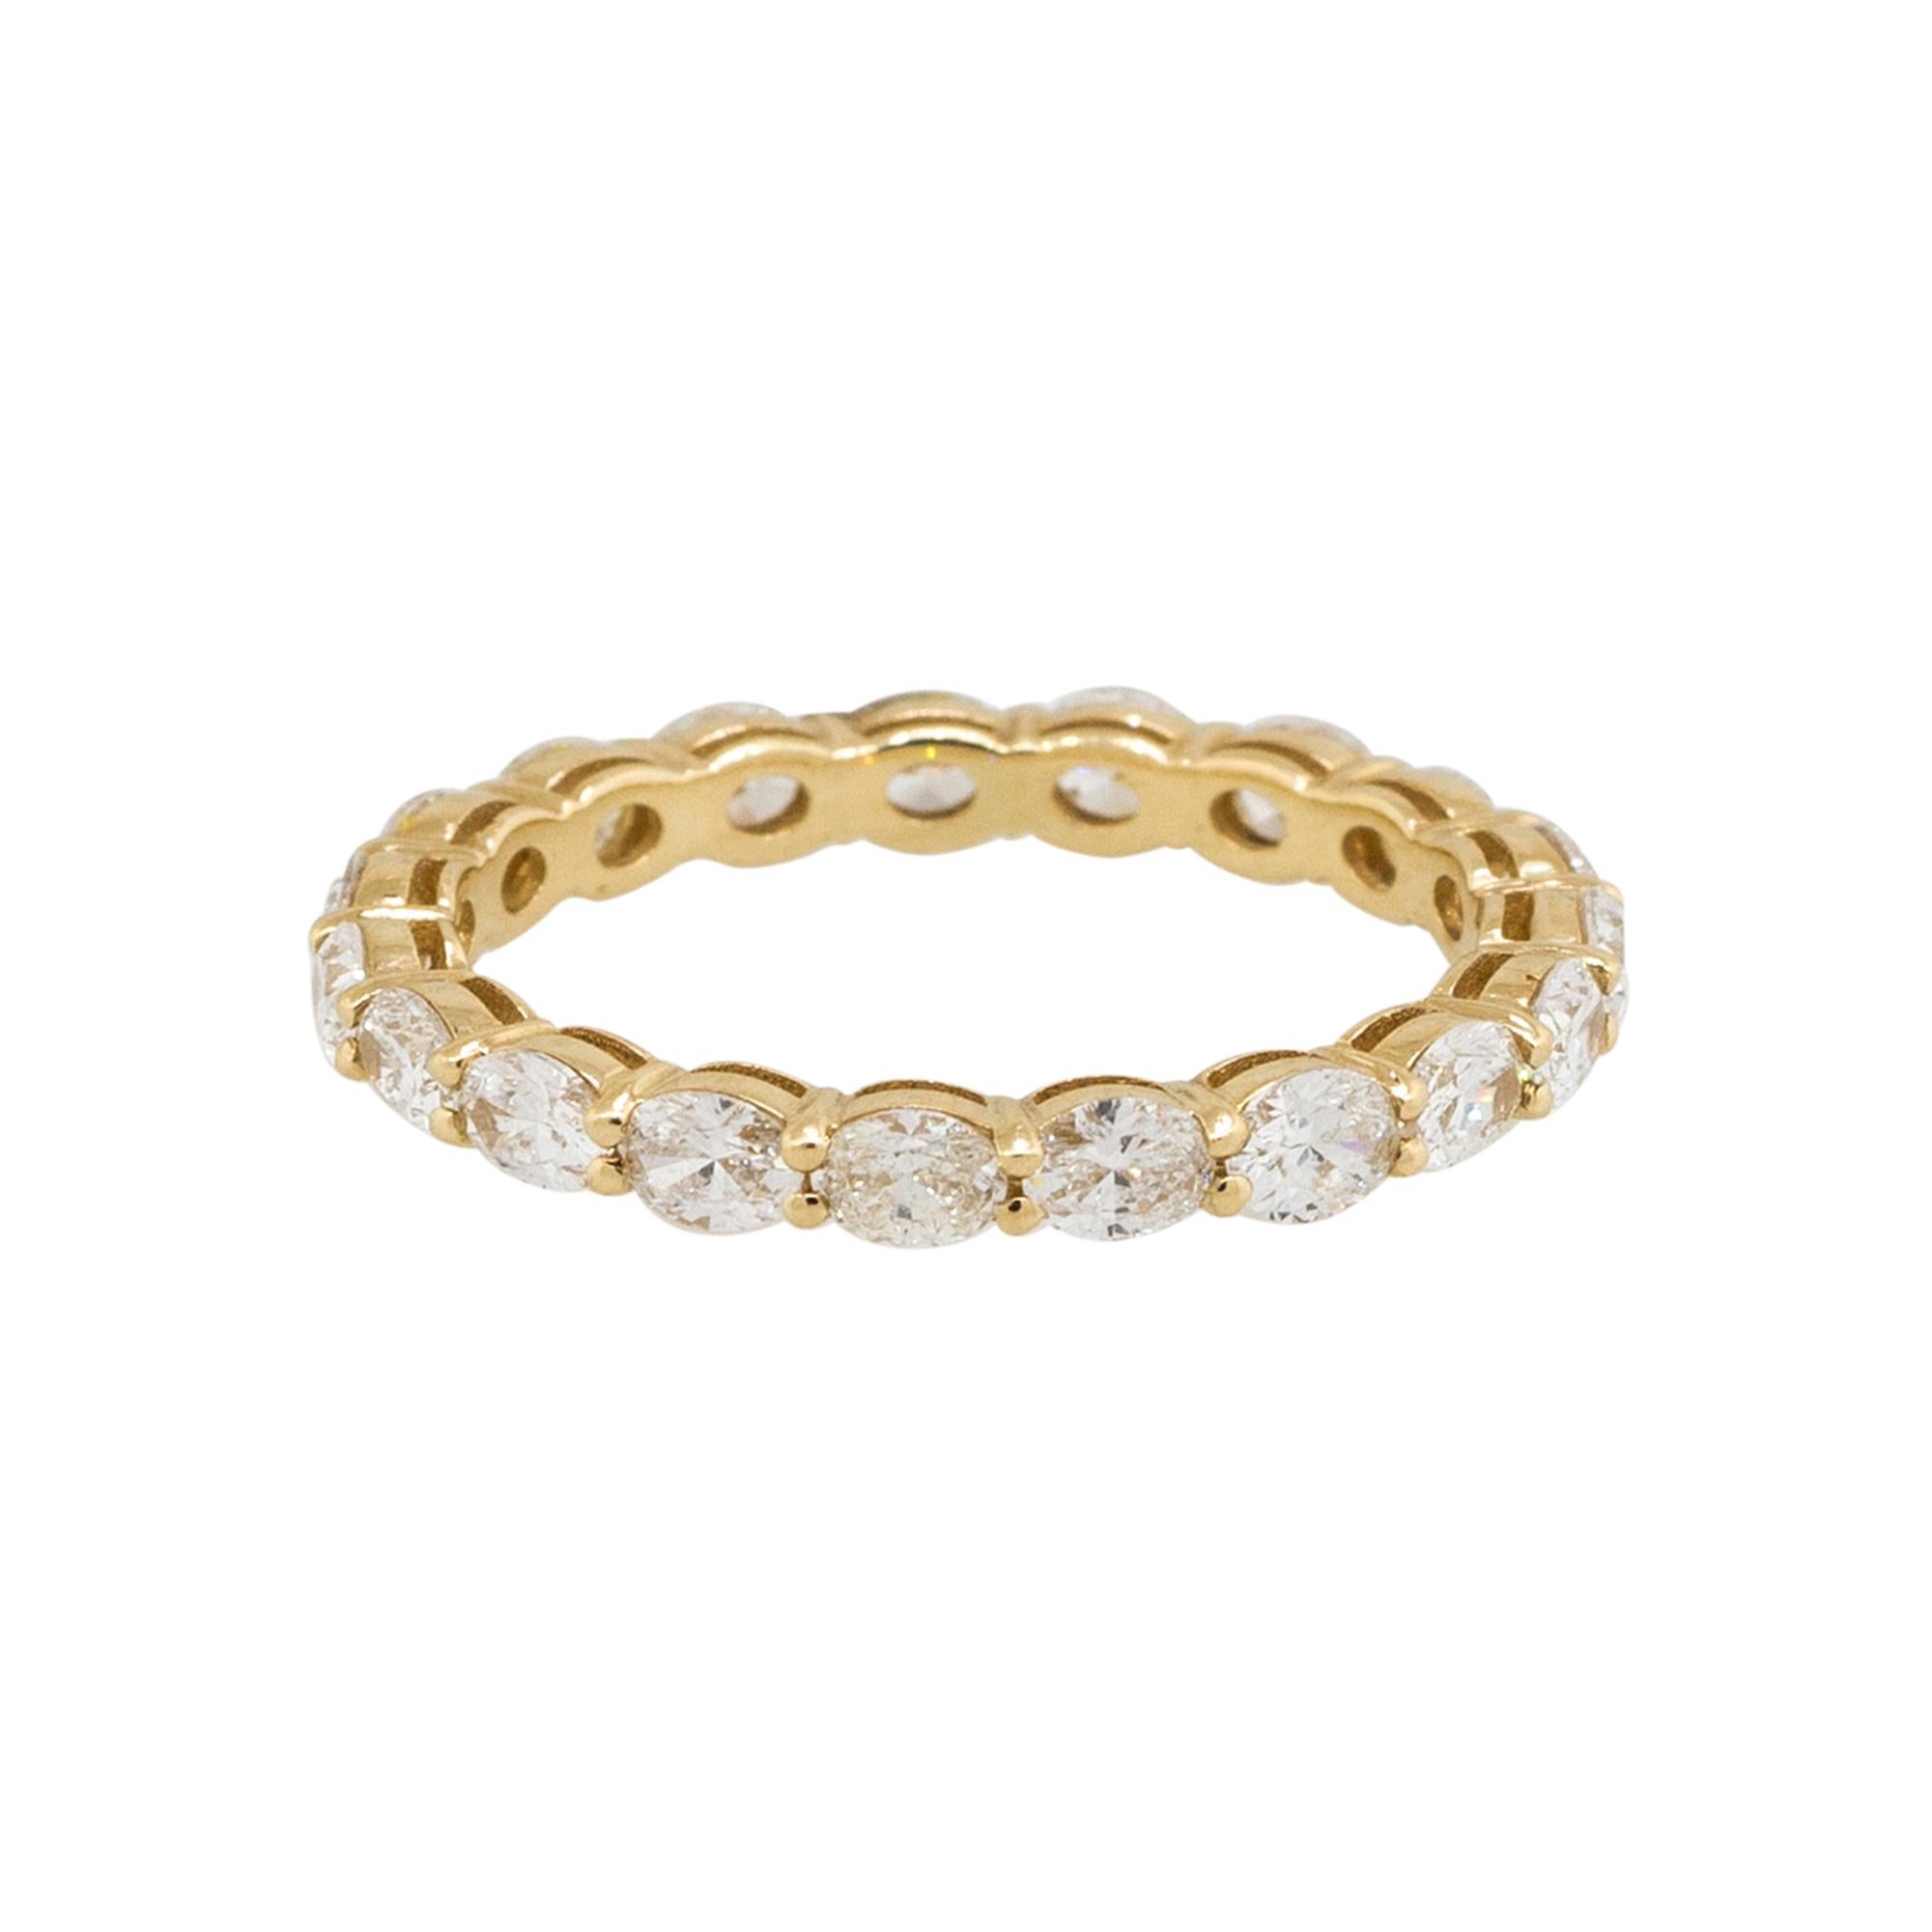 Material: 14k Yellow Gold
Diamond Details: Approx. 1.61ctw of oval cut Diamonds. Diamonds are G/H in color and VS in clarity.
Size: 6.25 
Measurements: 21.55mm x 2.35mm x 21.55mm
Weight: 1.6g (1dwt)
Additional Details: This item comes with a